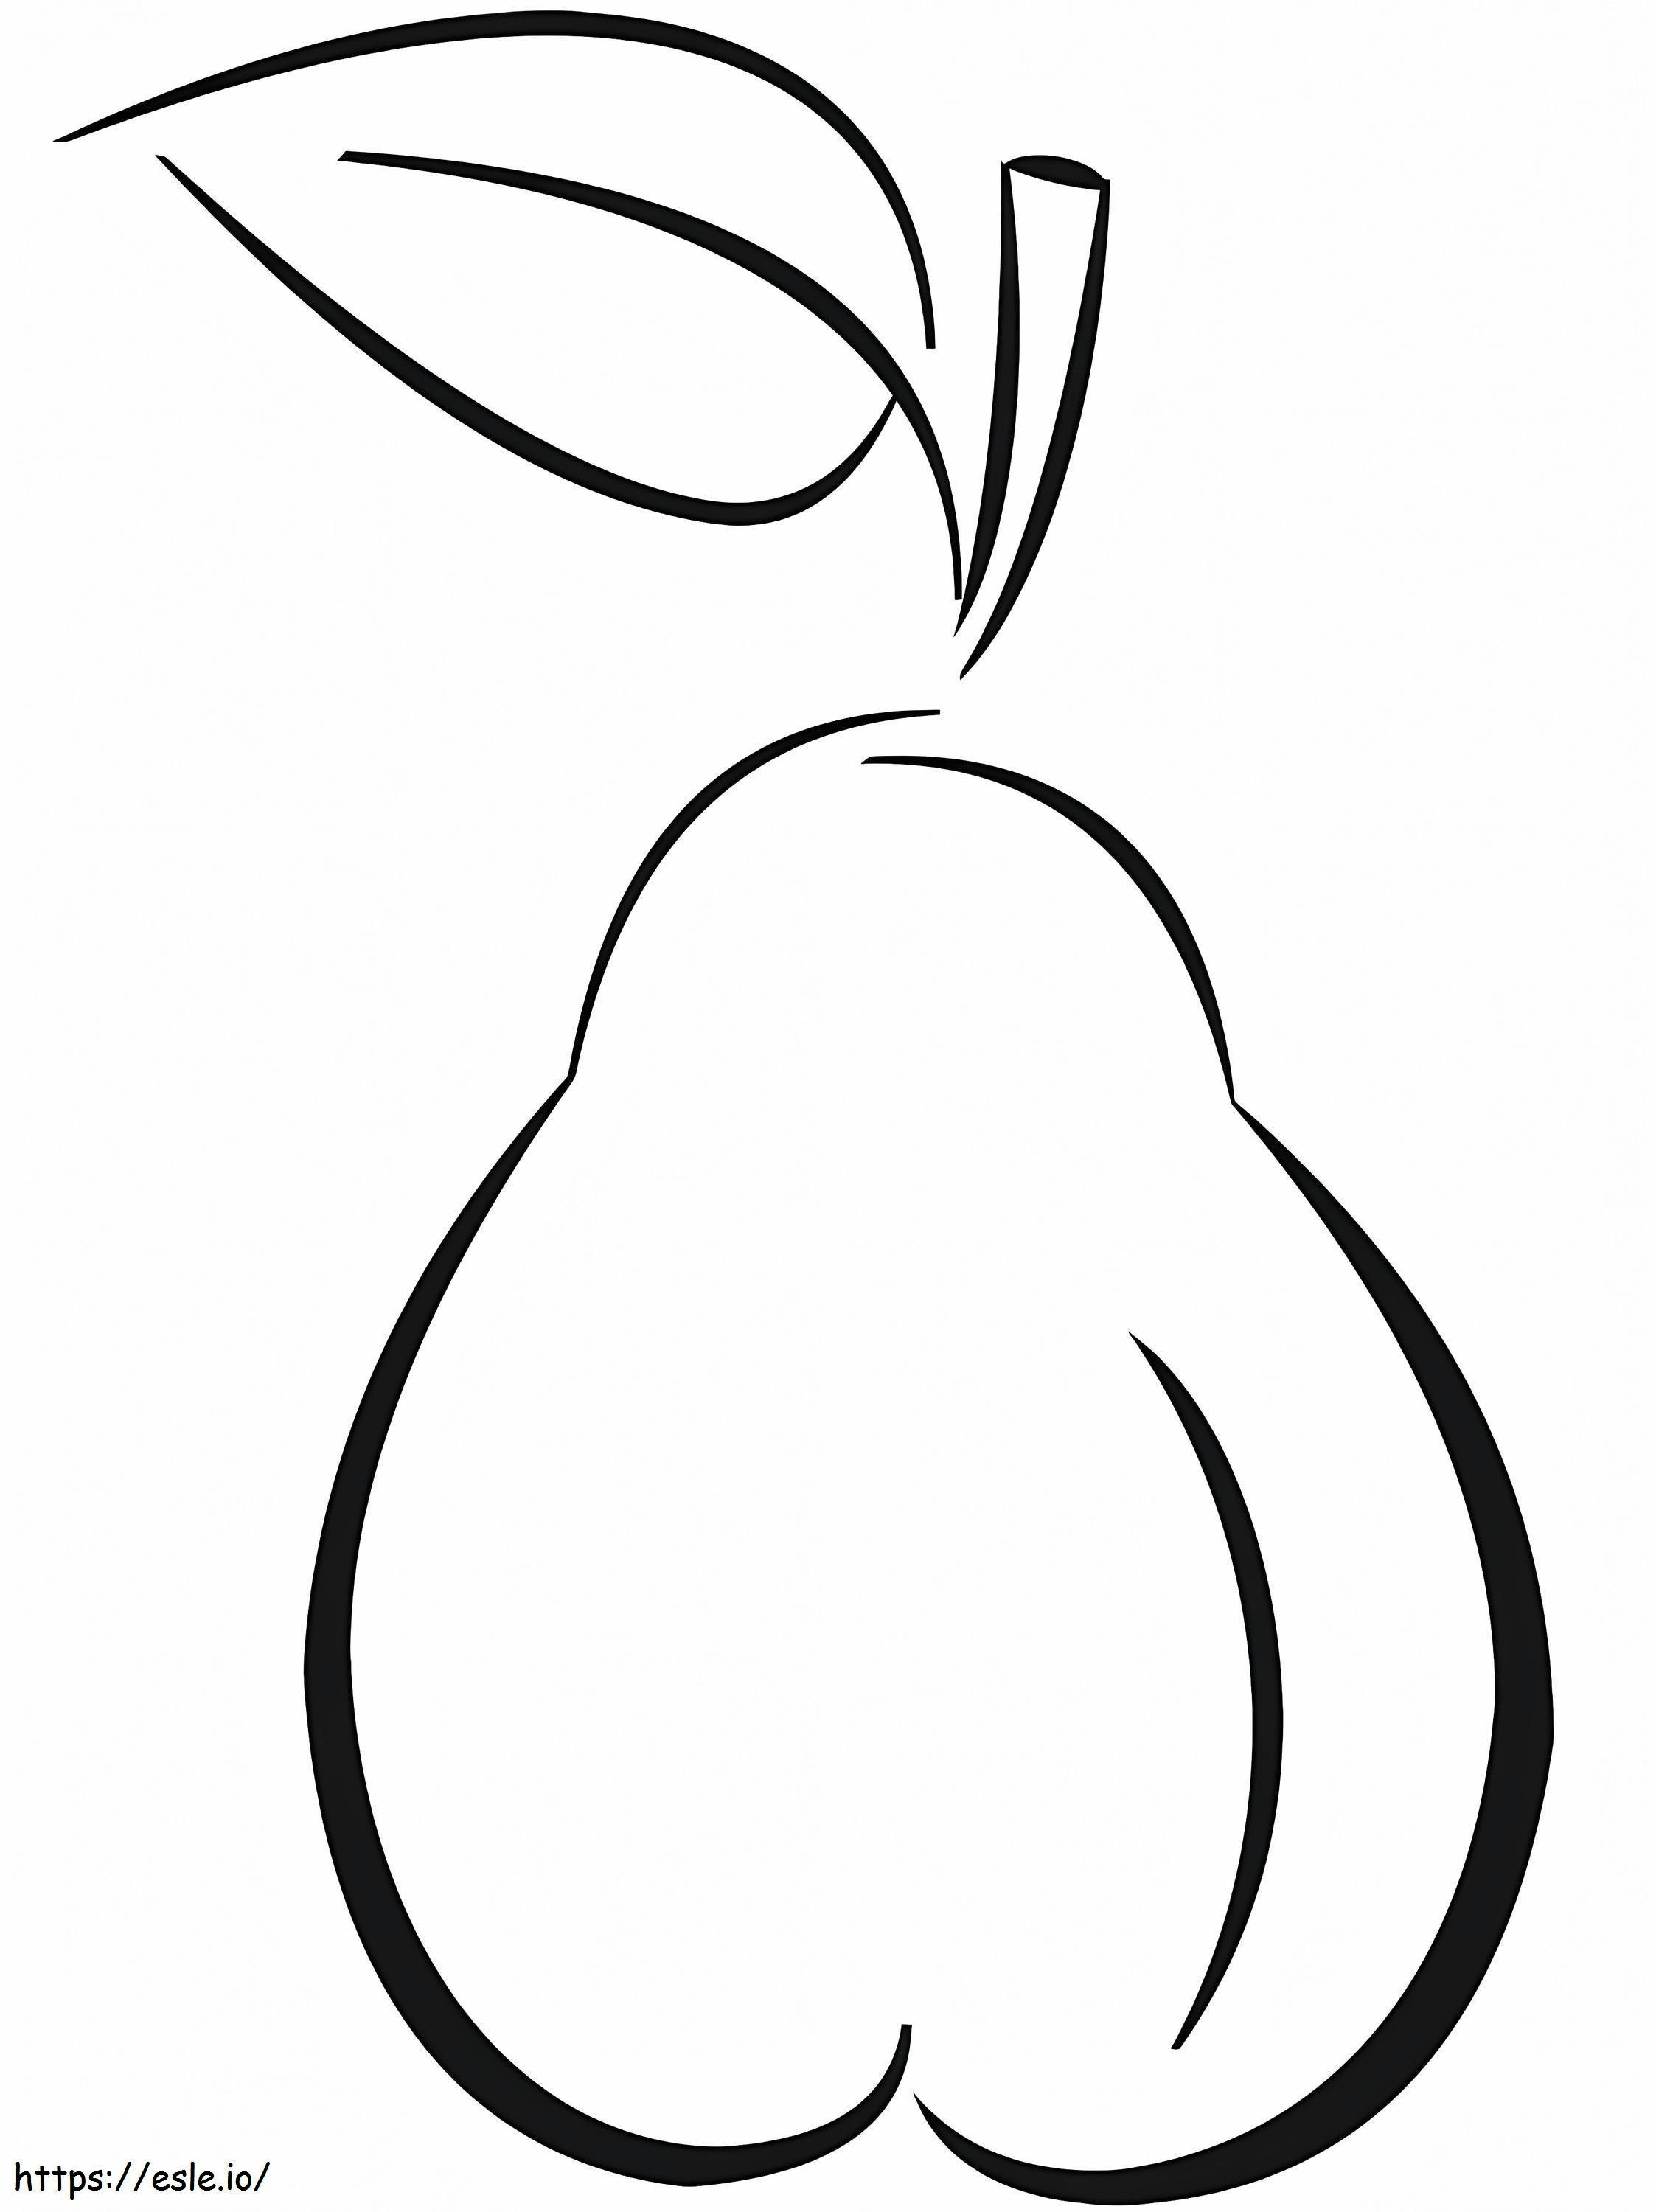 Simple Pear Fruit 1 coloring page